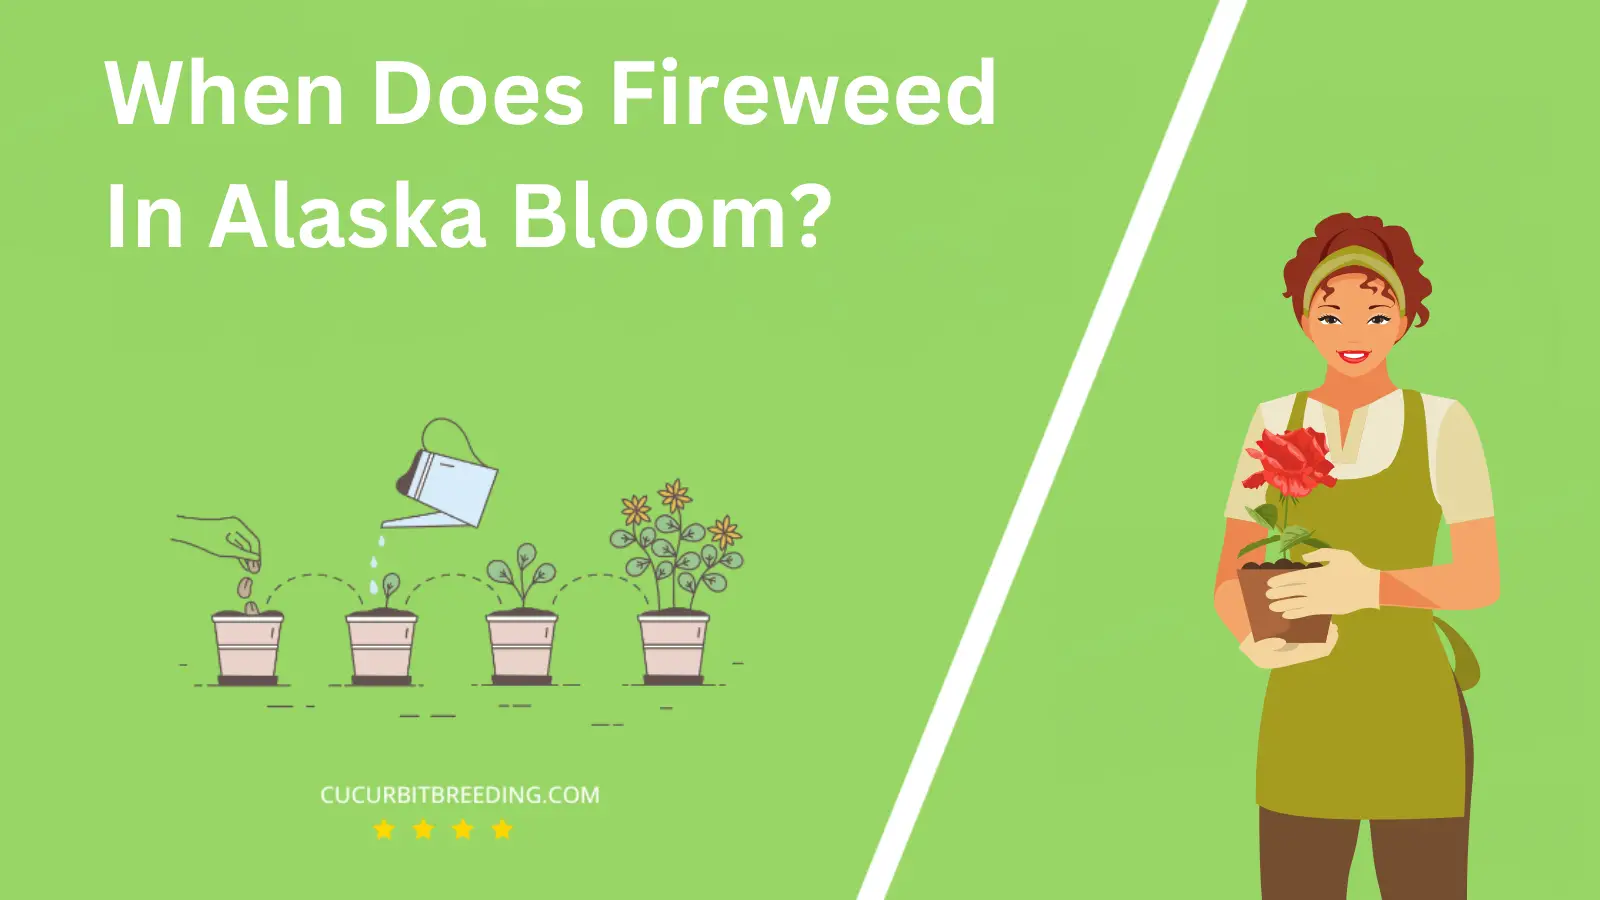 When Does Fireweed In Alaska Bloom?